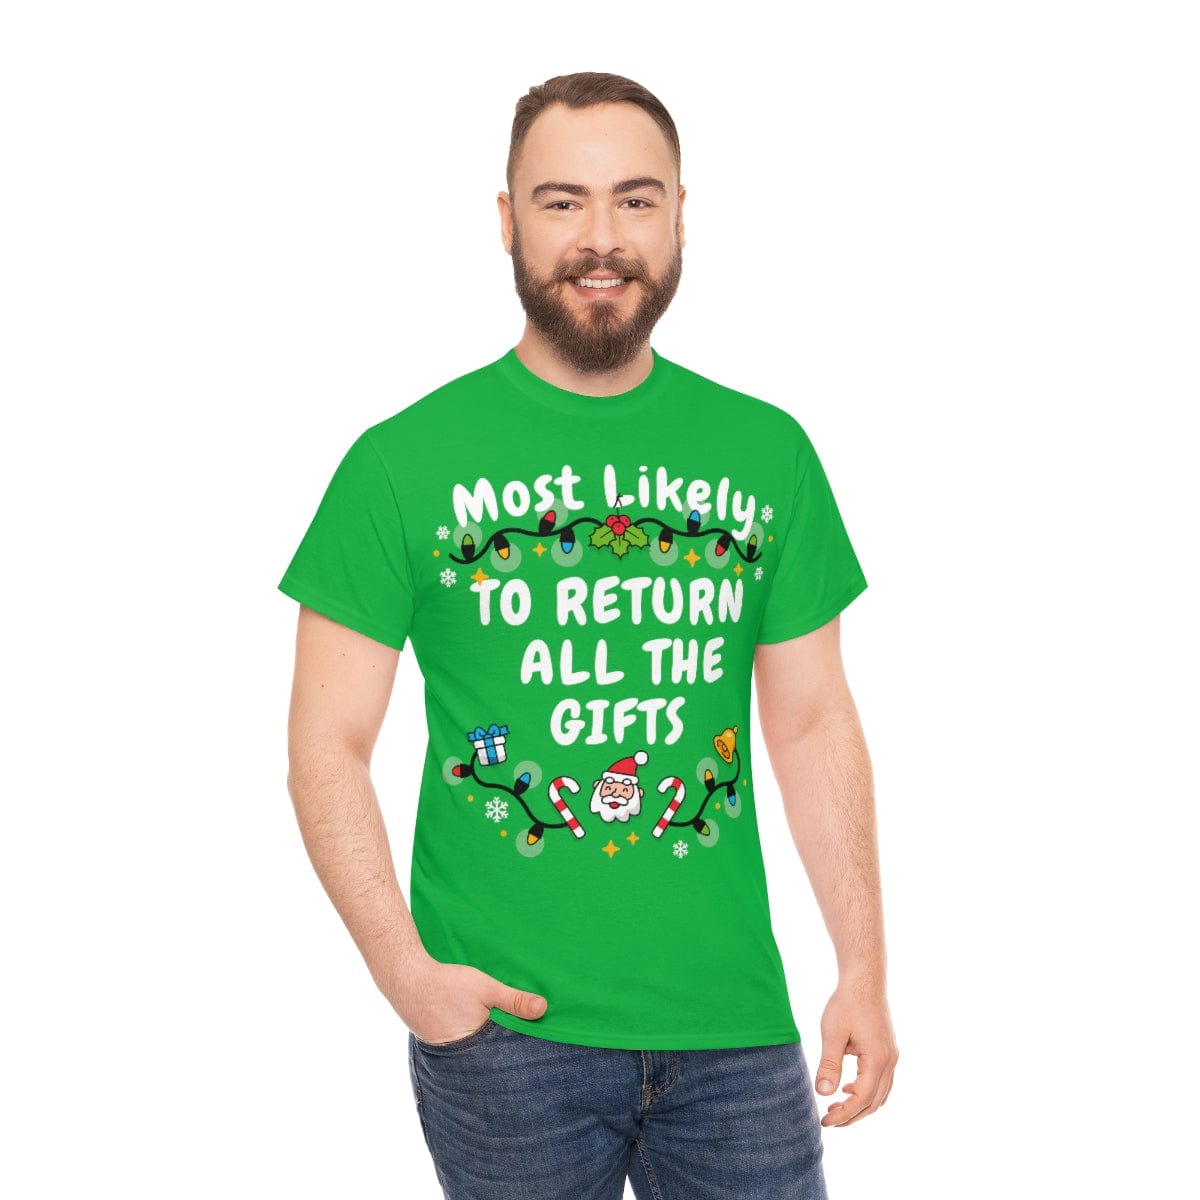 TO RETURN ALL THE GIFTS